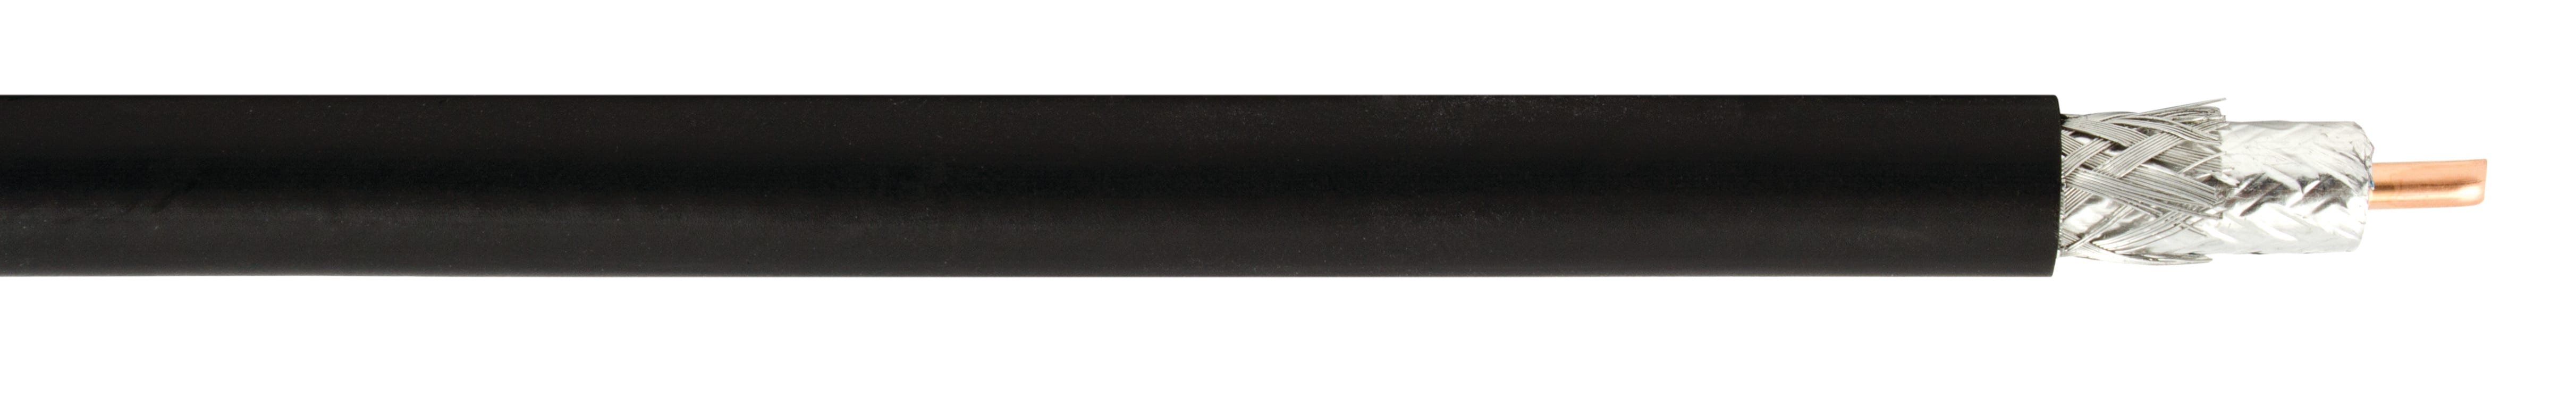 CAE Data - Cable coaxial 1x2,75 mm gaine PE noire